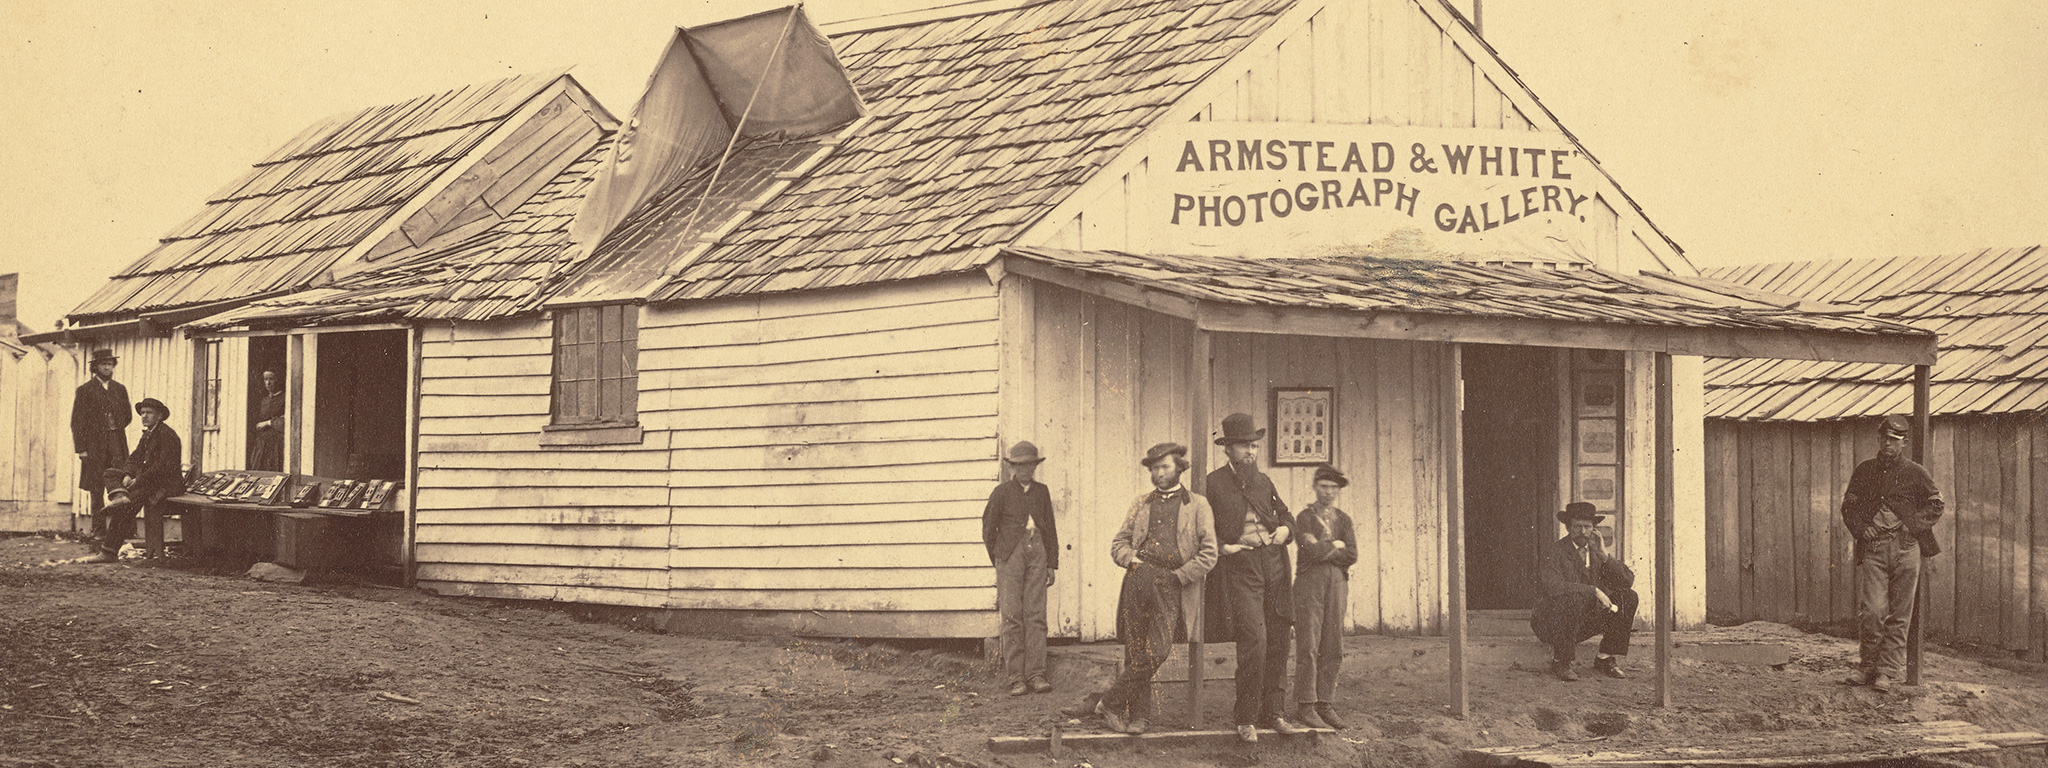 Armstead & White Photograph Gallery (detail), 1861-1865, Armstead & White [George Armstead and Henry White], albumen silver print. The J. Paul Getty Museum